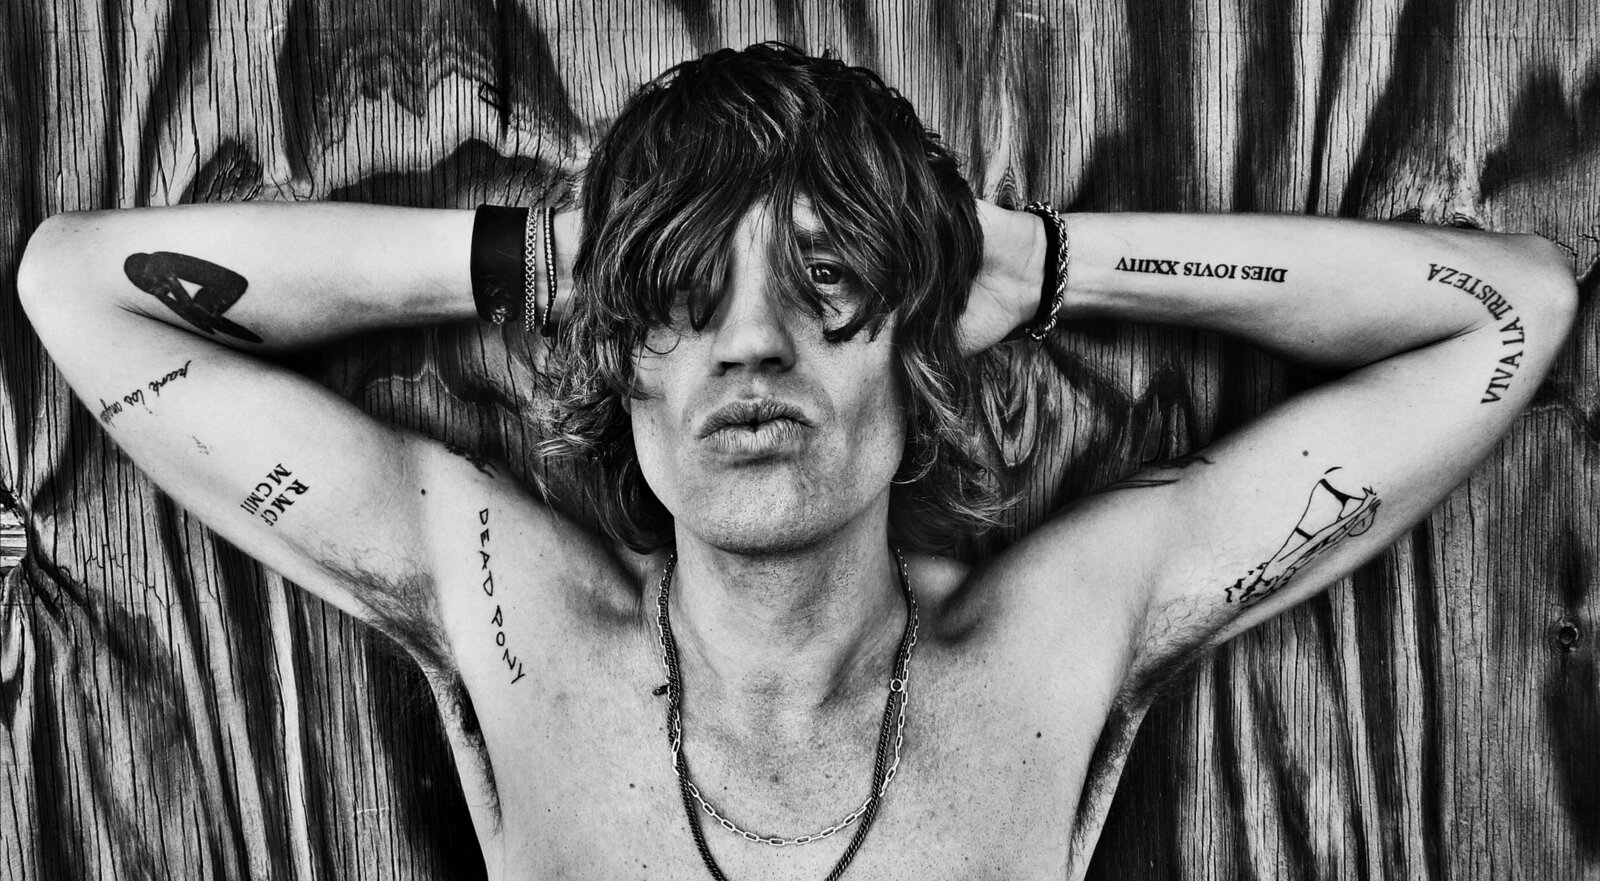 Musician Portrait Nico Stai black and white shirtless arms folded behind his head against wood textured wall